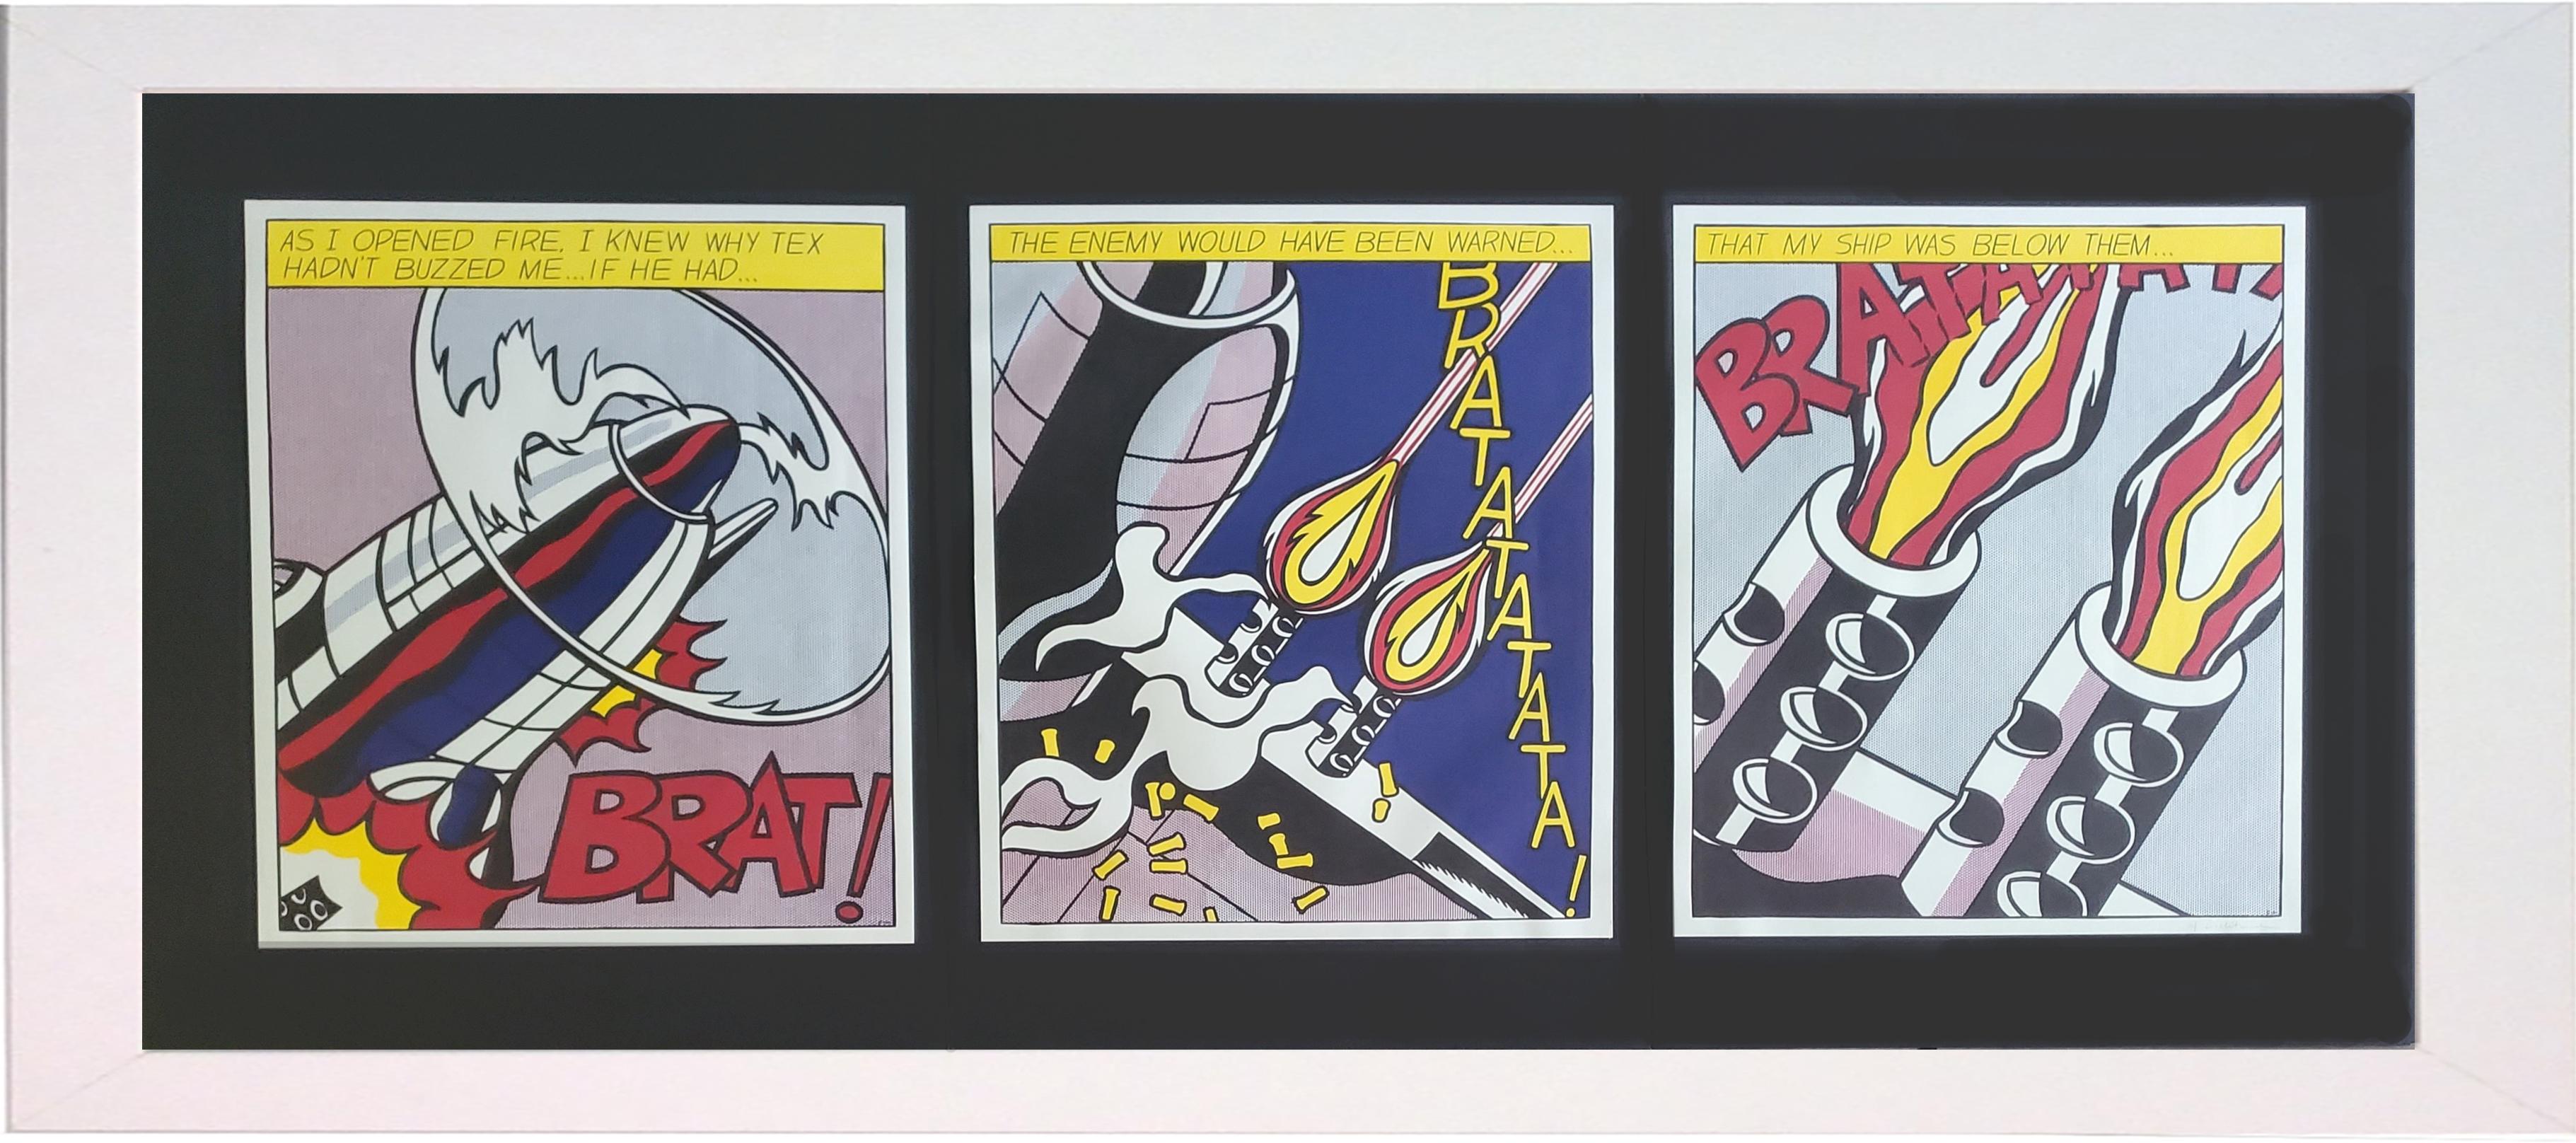 ROY LICHTENSTEIN 'AS I OPENED FIRE' TRIPTYCH SET OF 3, SIGNED (RIGHT PANEL) 1966